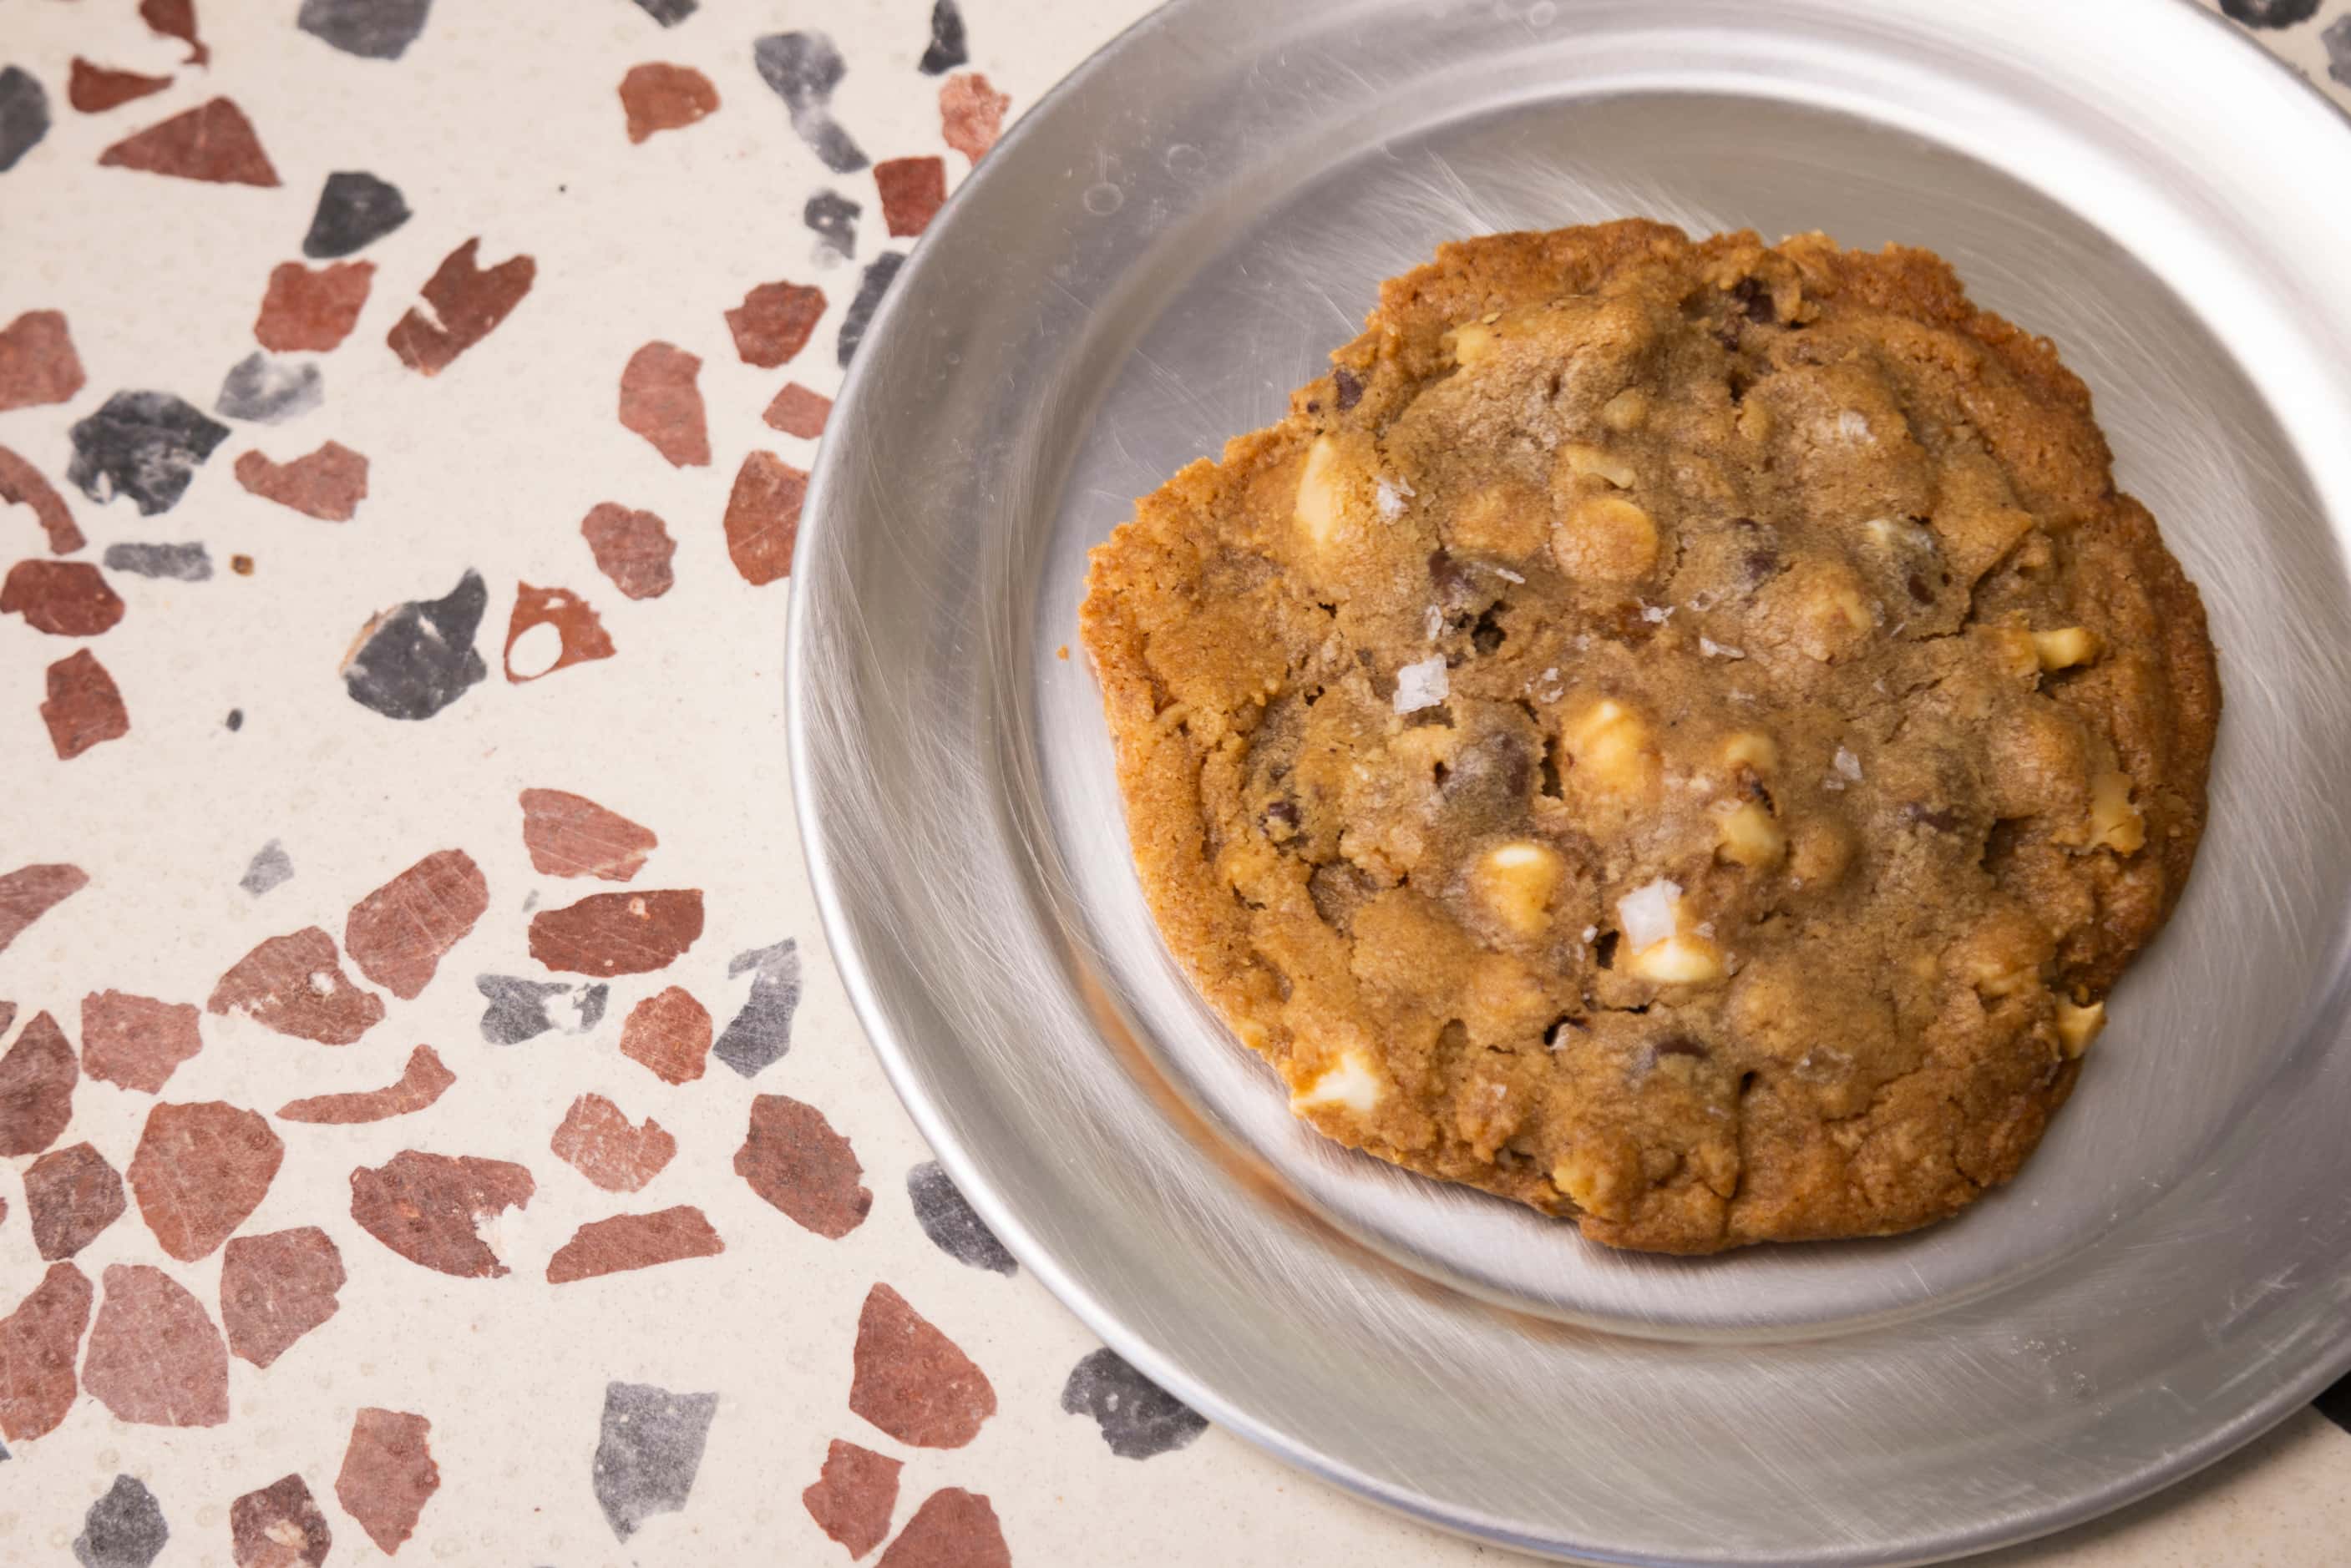 The Brown Butter Chocolate Chip Cookie served at the Wriggly Tin, a new bar near Fair Park,...